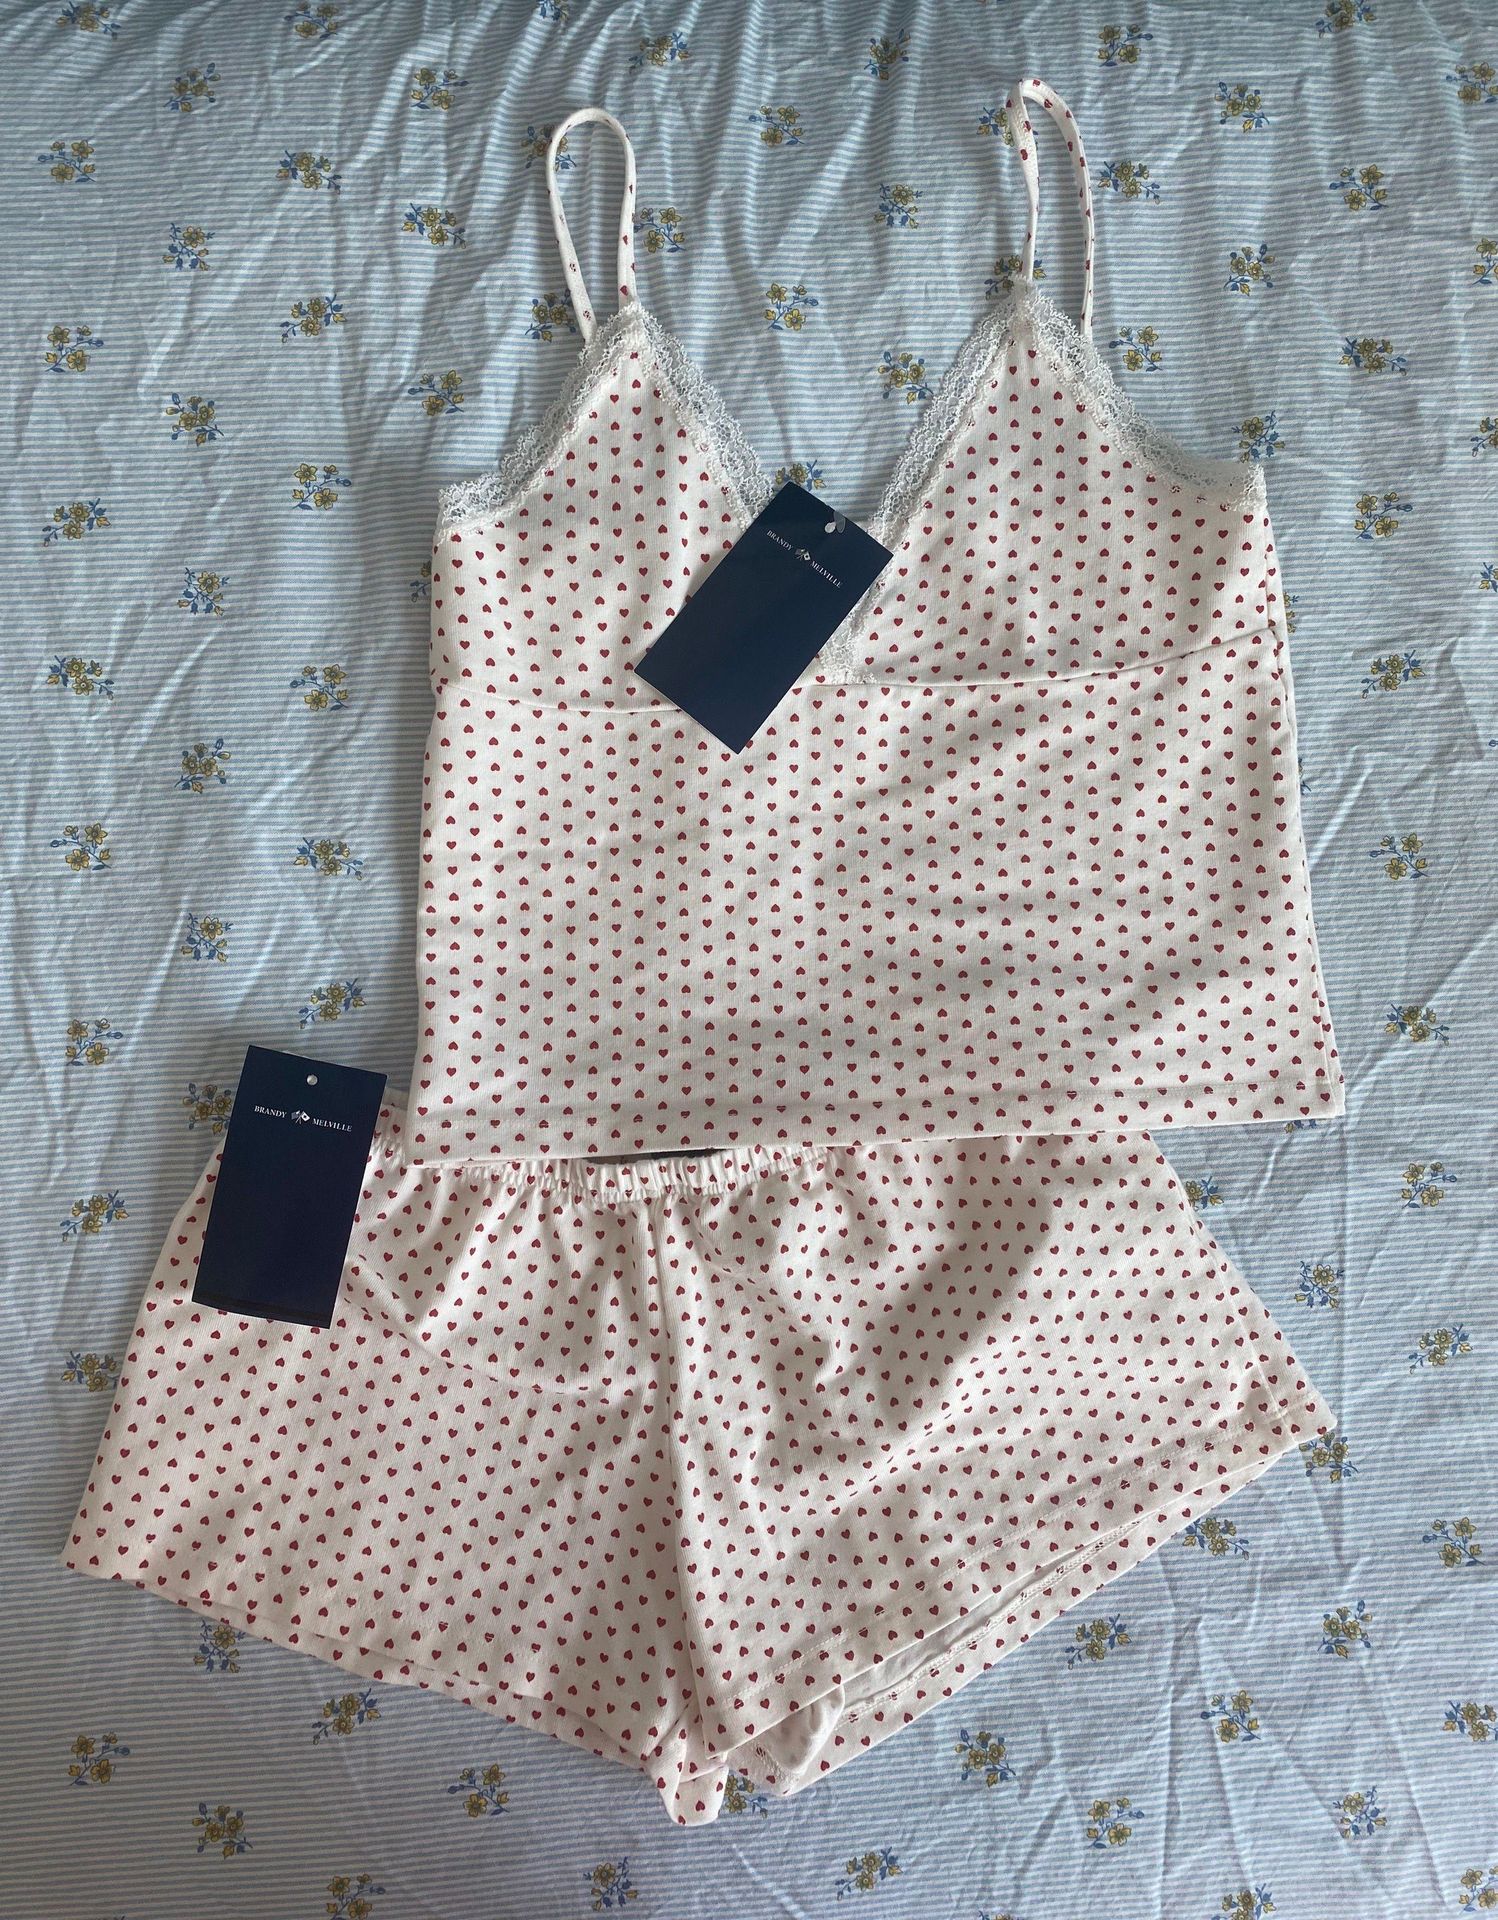 Brandy Melville Heart Pajama Set White - $50 New With Tags - From